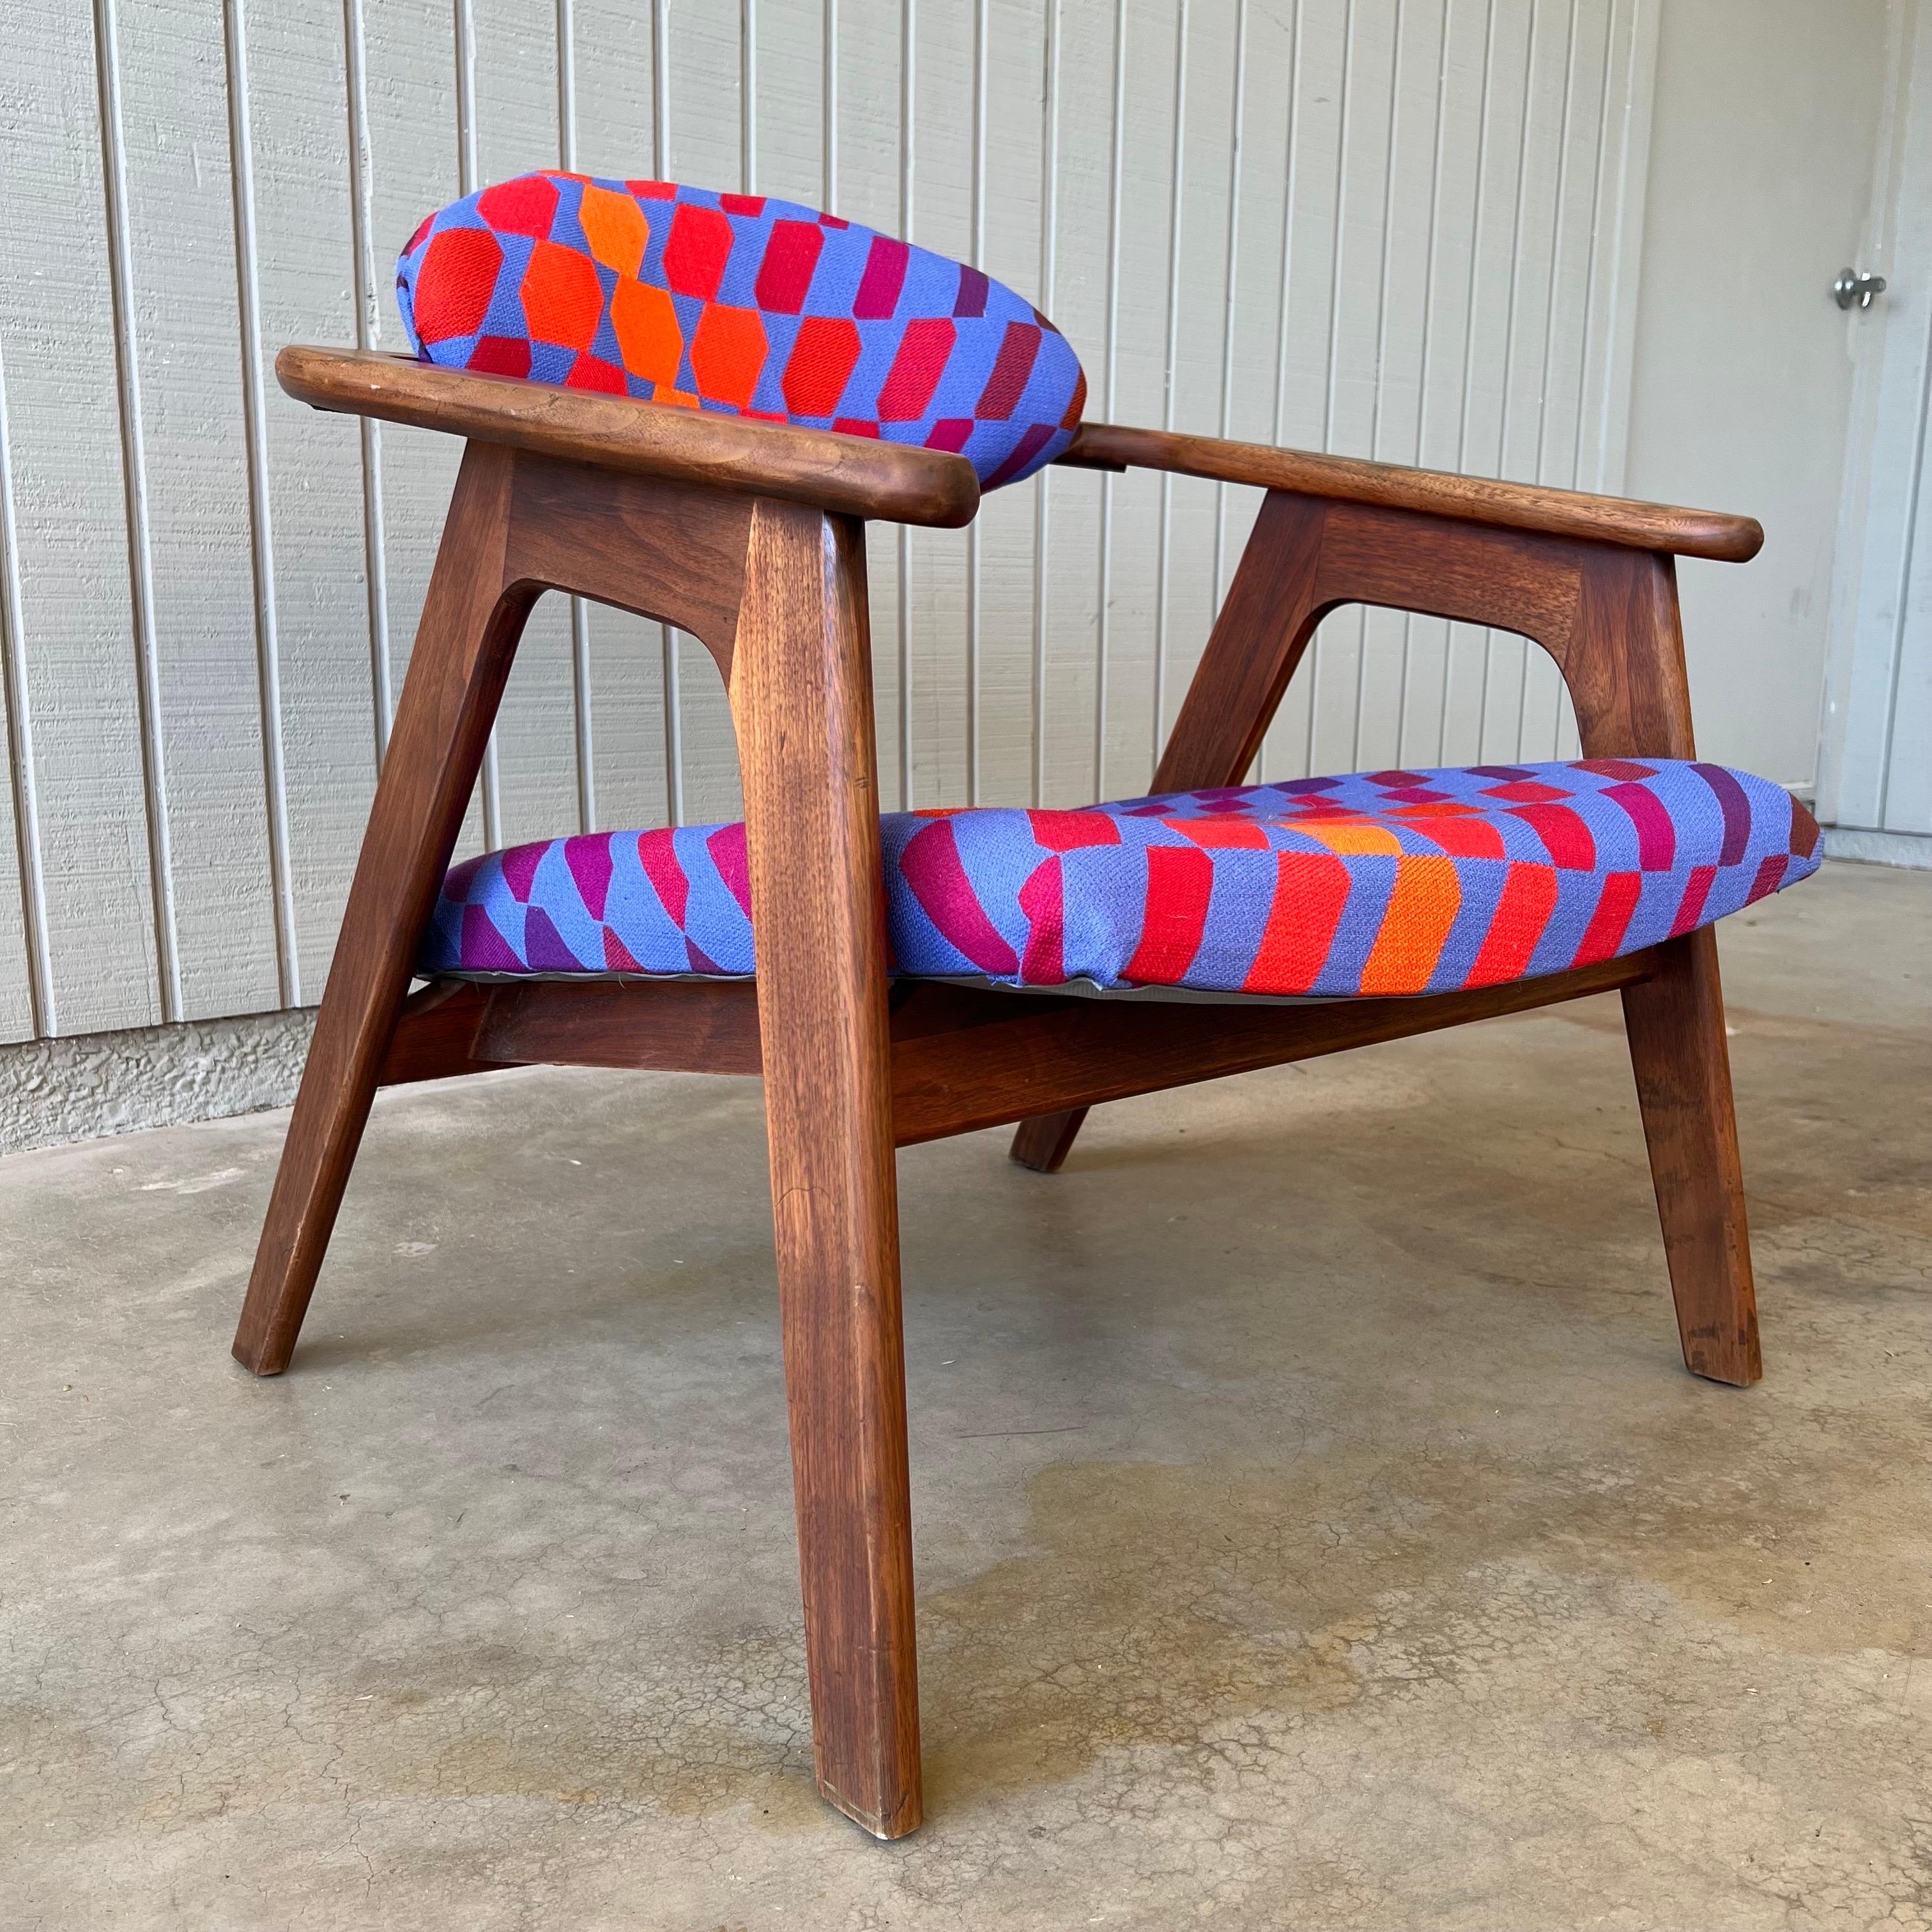 Uncommon Adrian Pearsall 916-CC captain chair for Craft Associates, 1960s with fun patterned newer upholstery. The walnut frame is in good condition with two minor issues: one small chip at the bottom of one of the legs and a crack on the bottom of